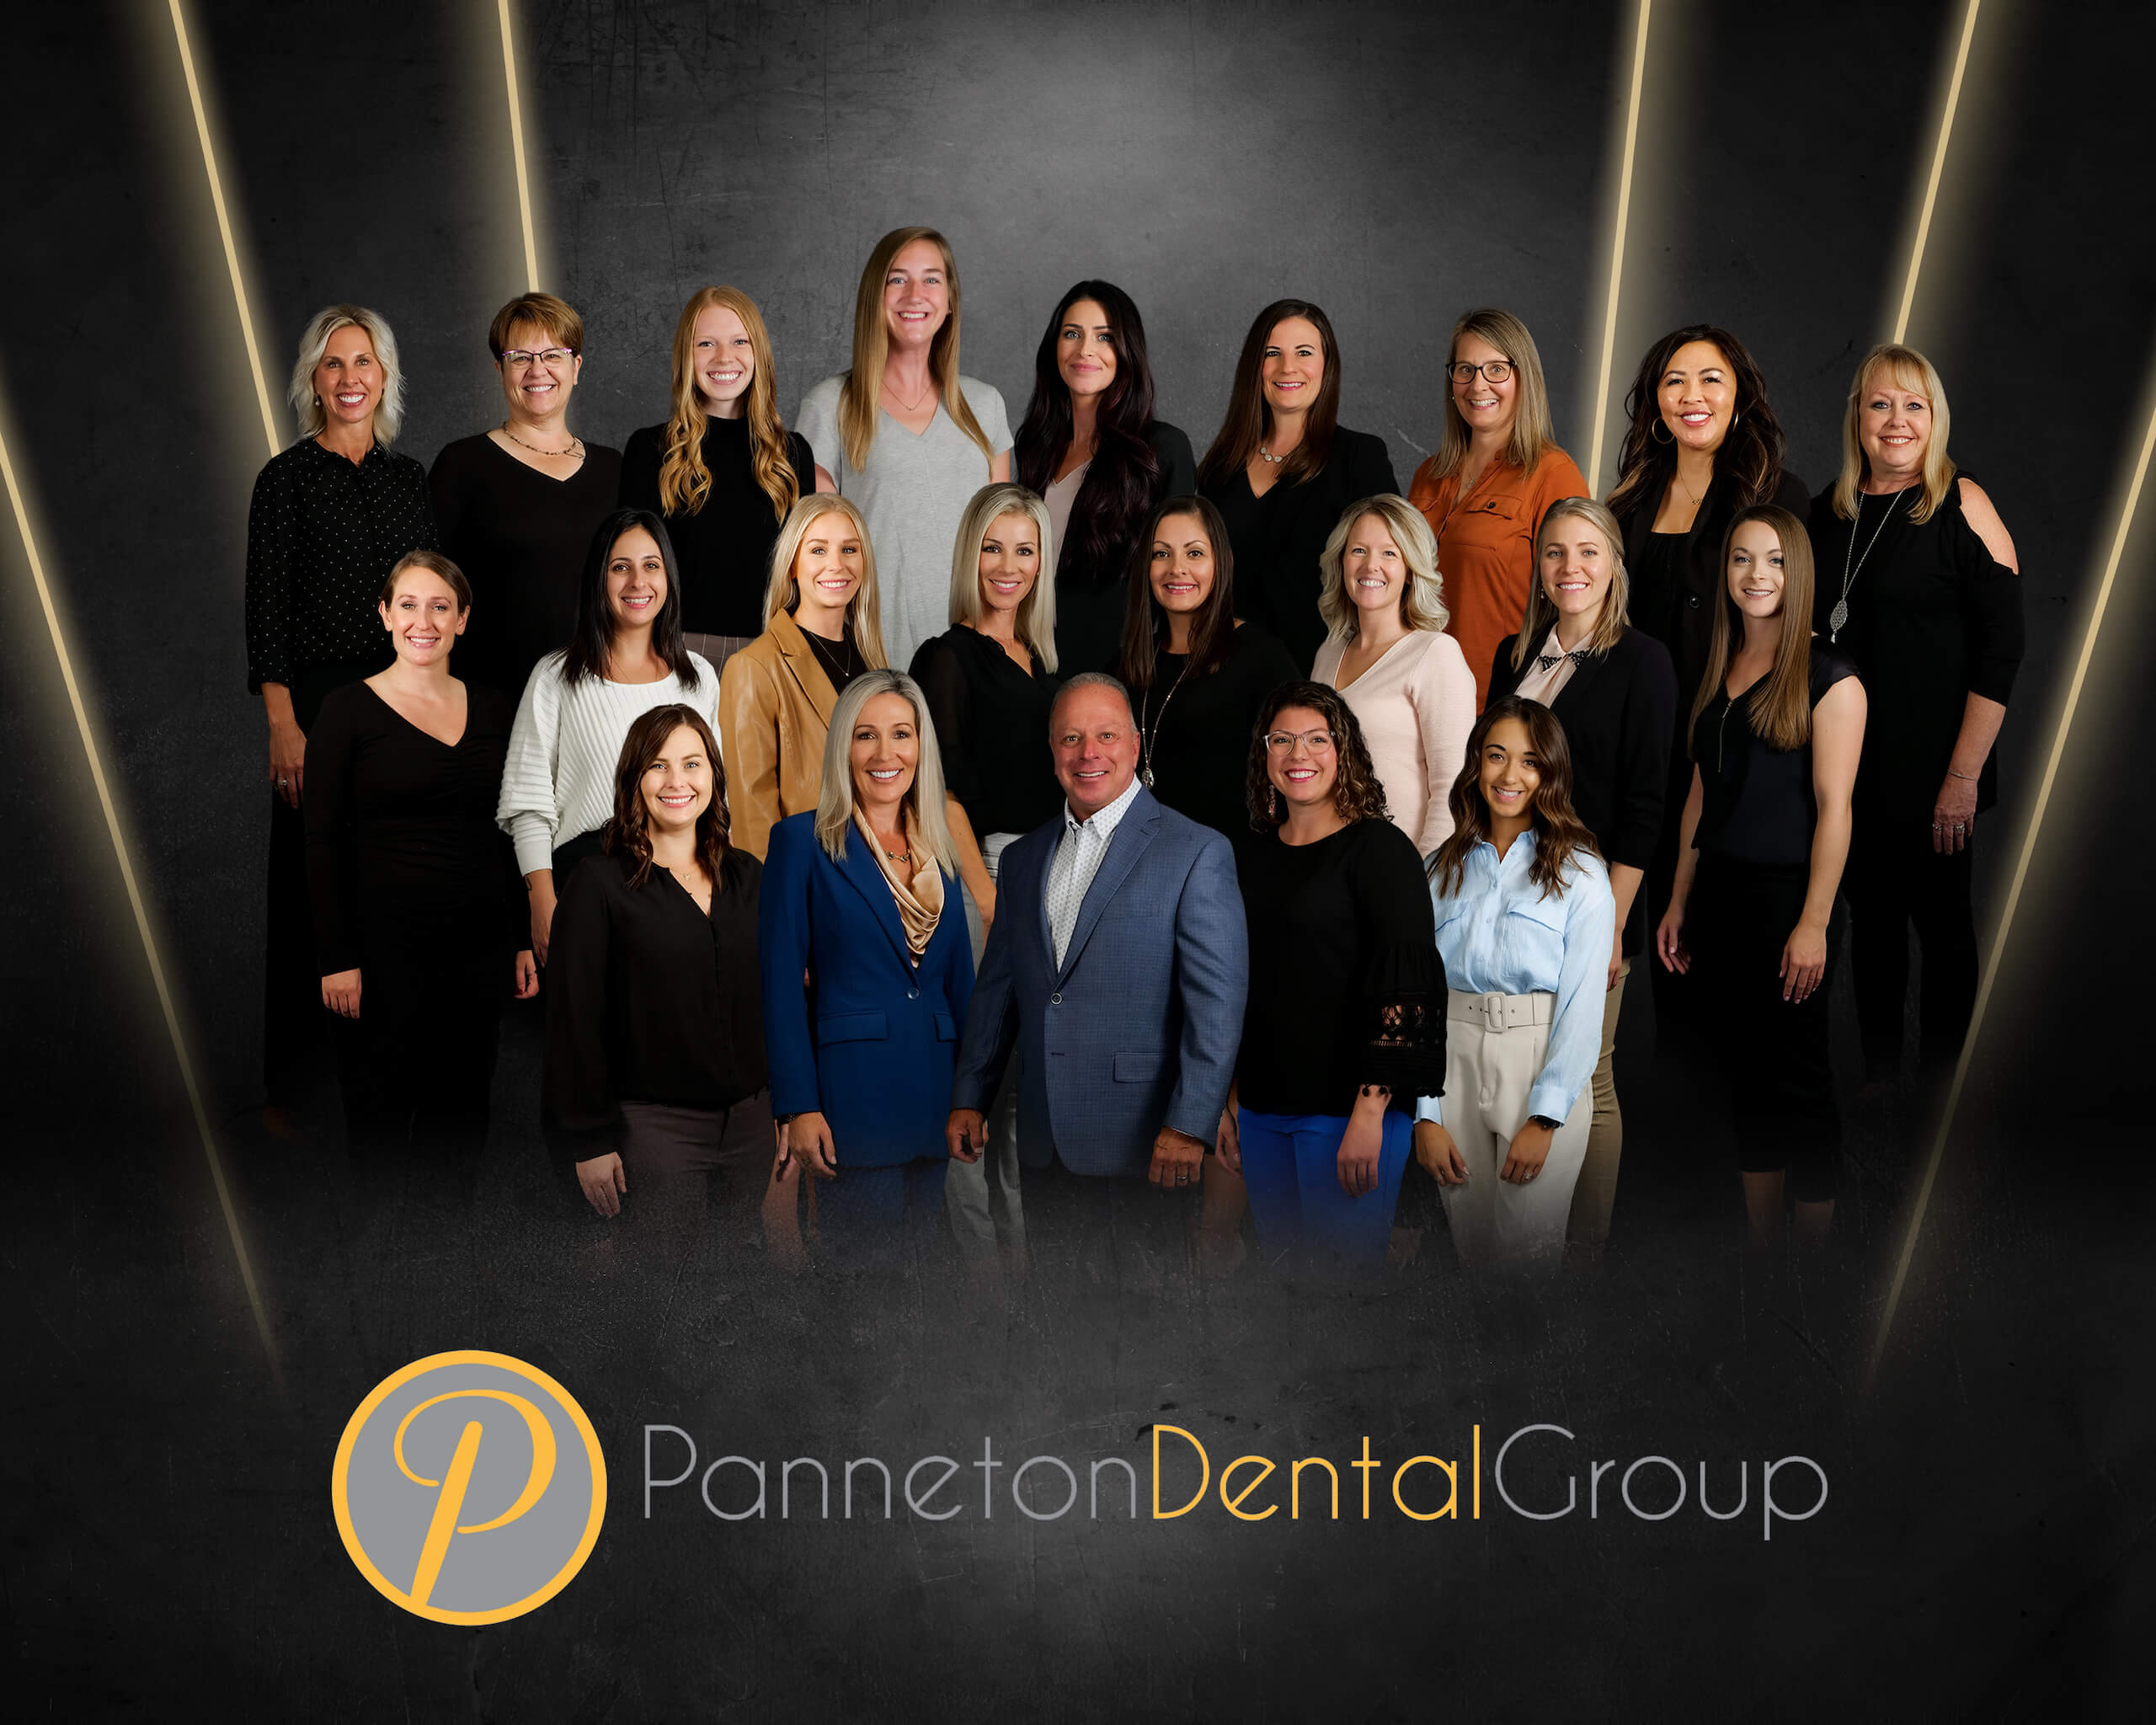 Panneton Dental Group staff standing and smiling for the camera